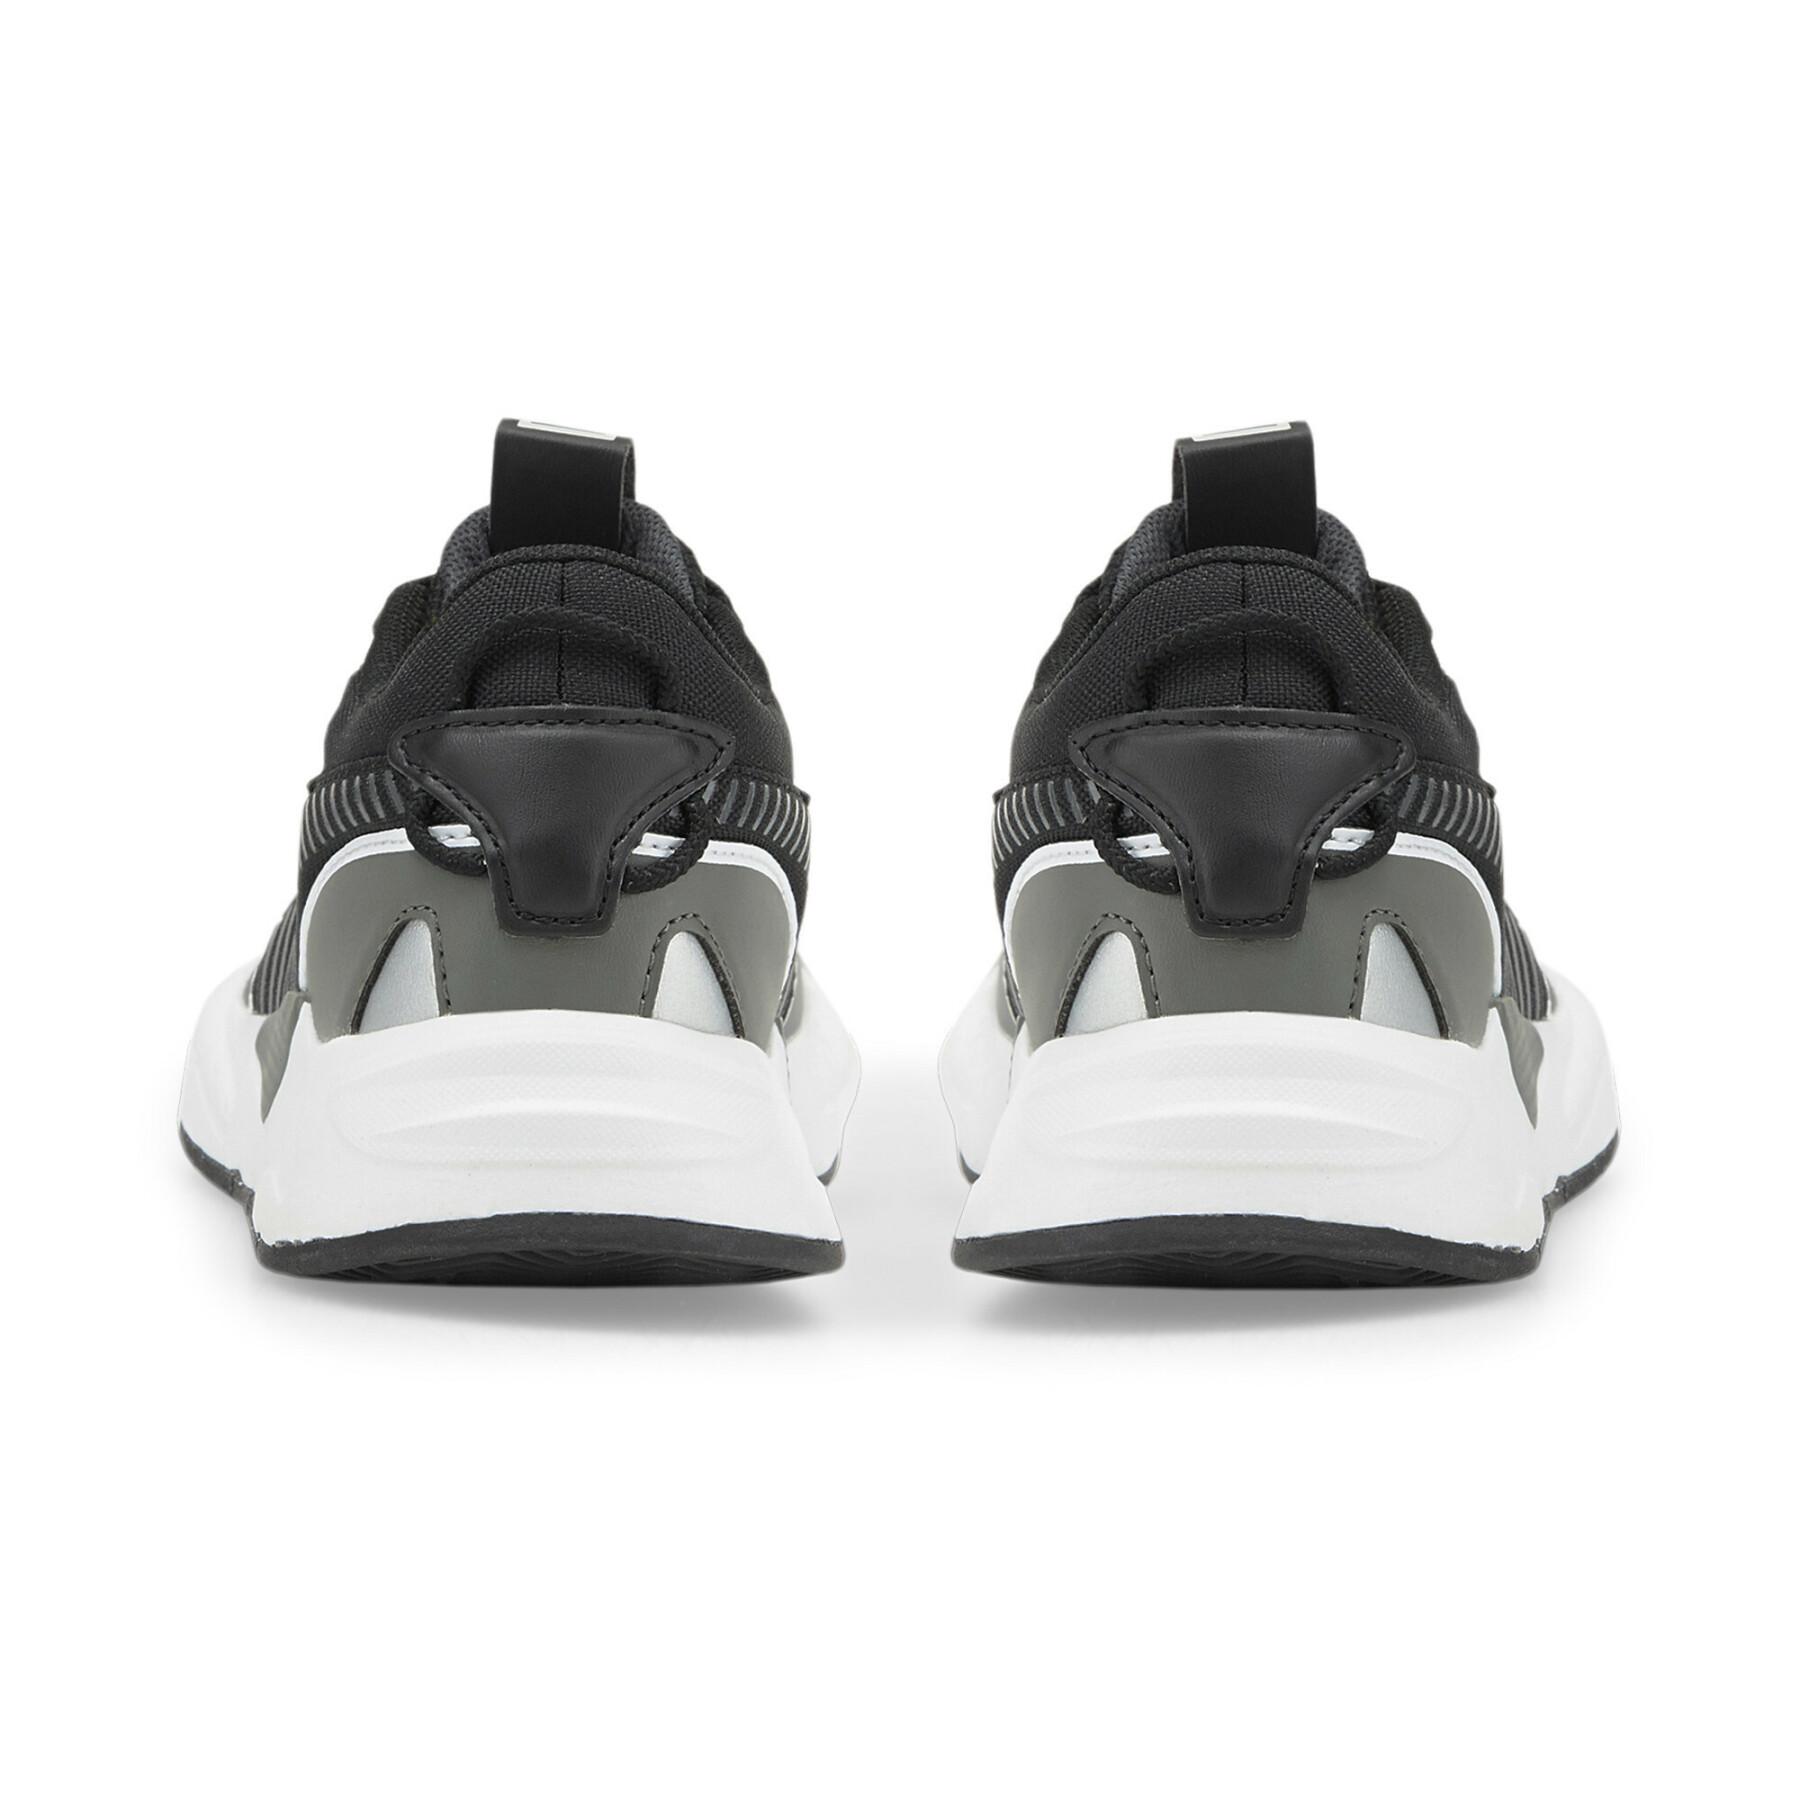 Children's sneakers Puma Rs-Z Outline Ps